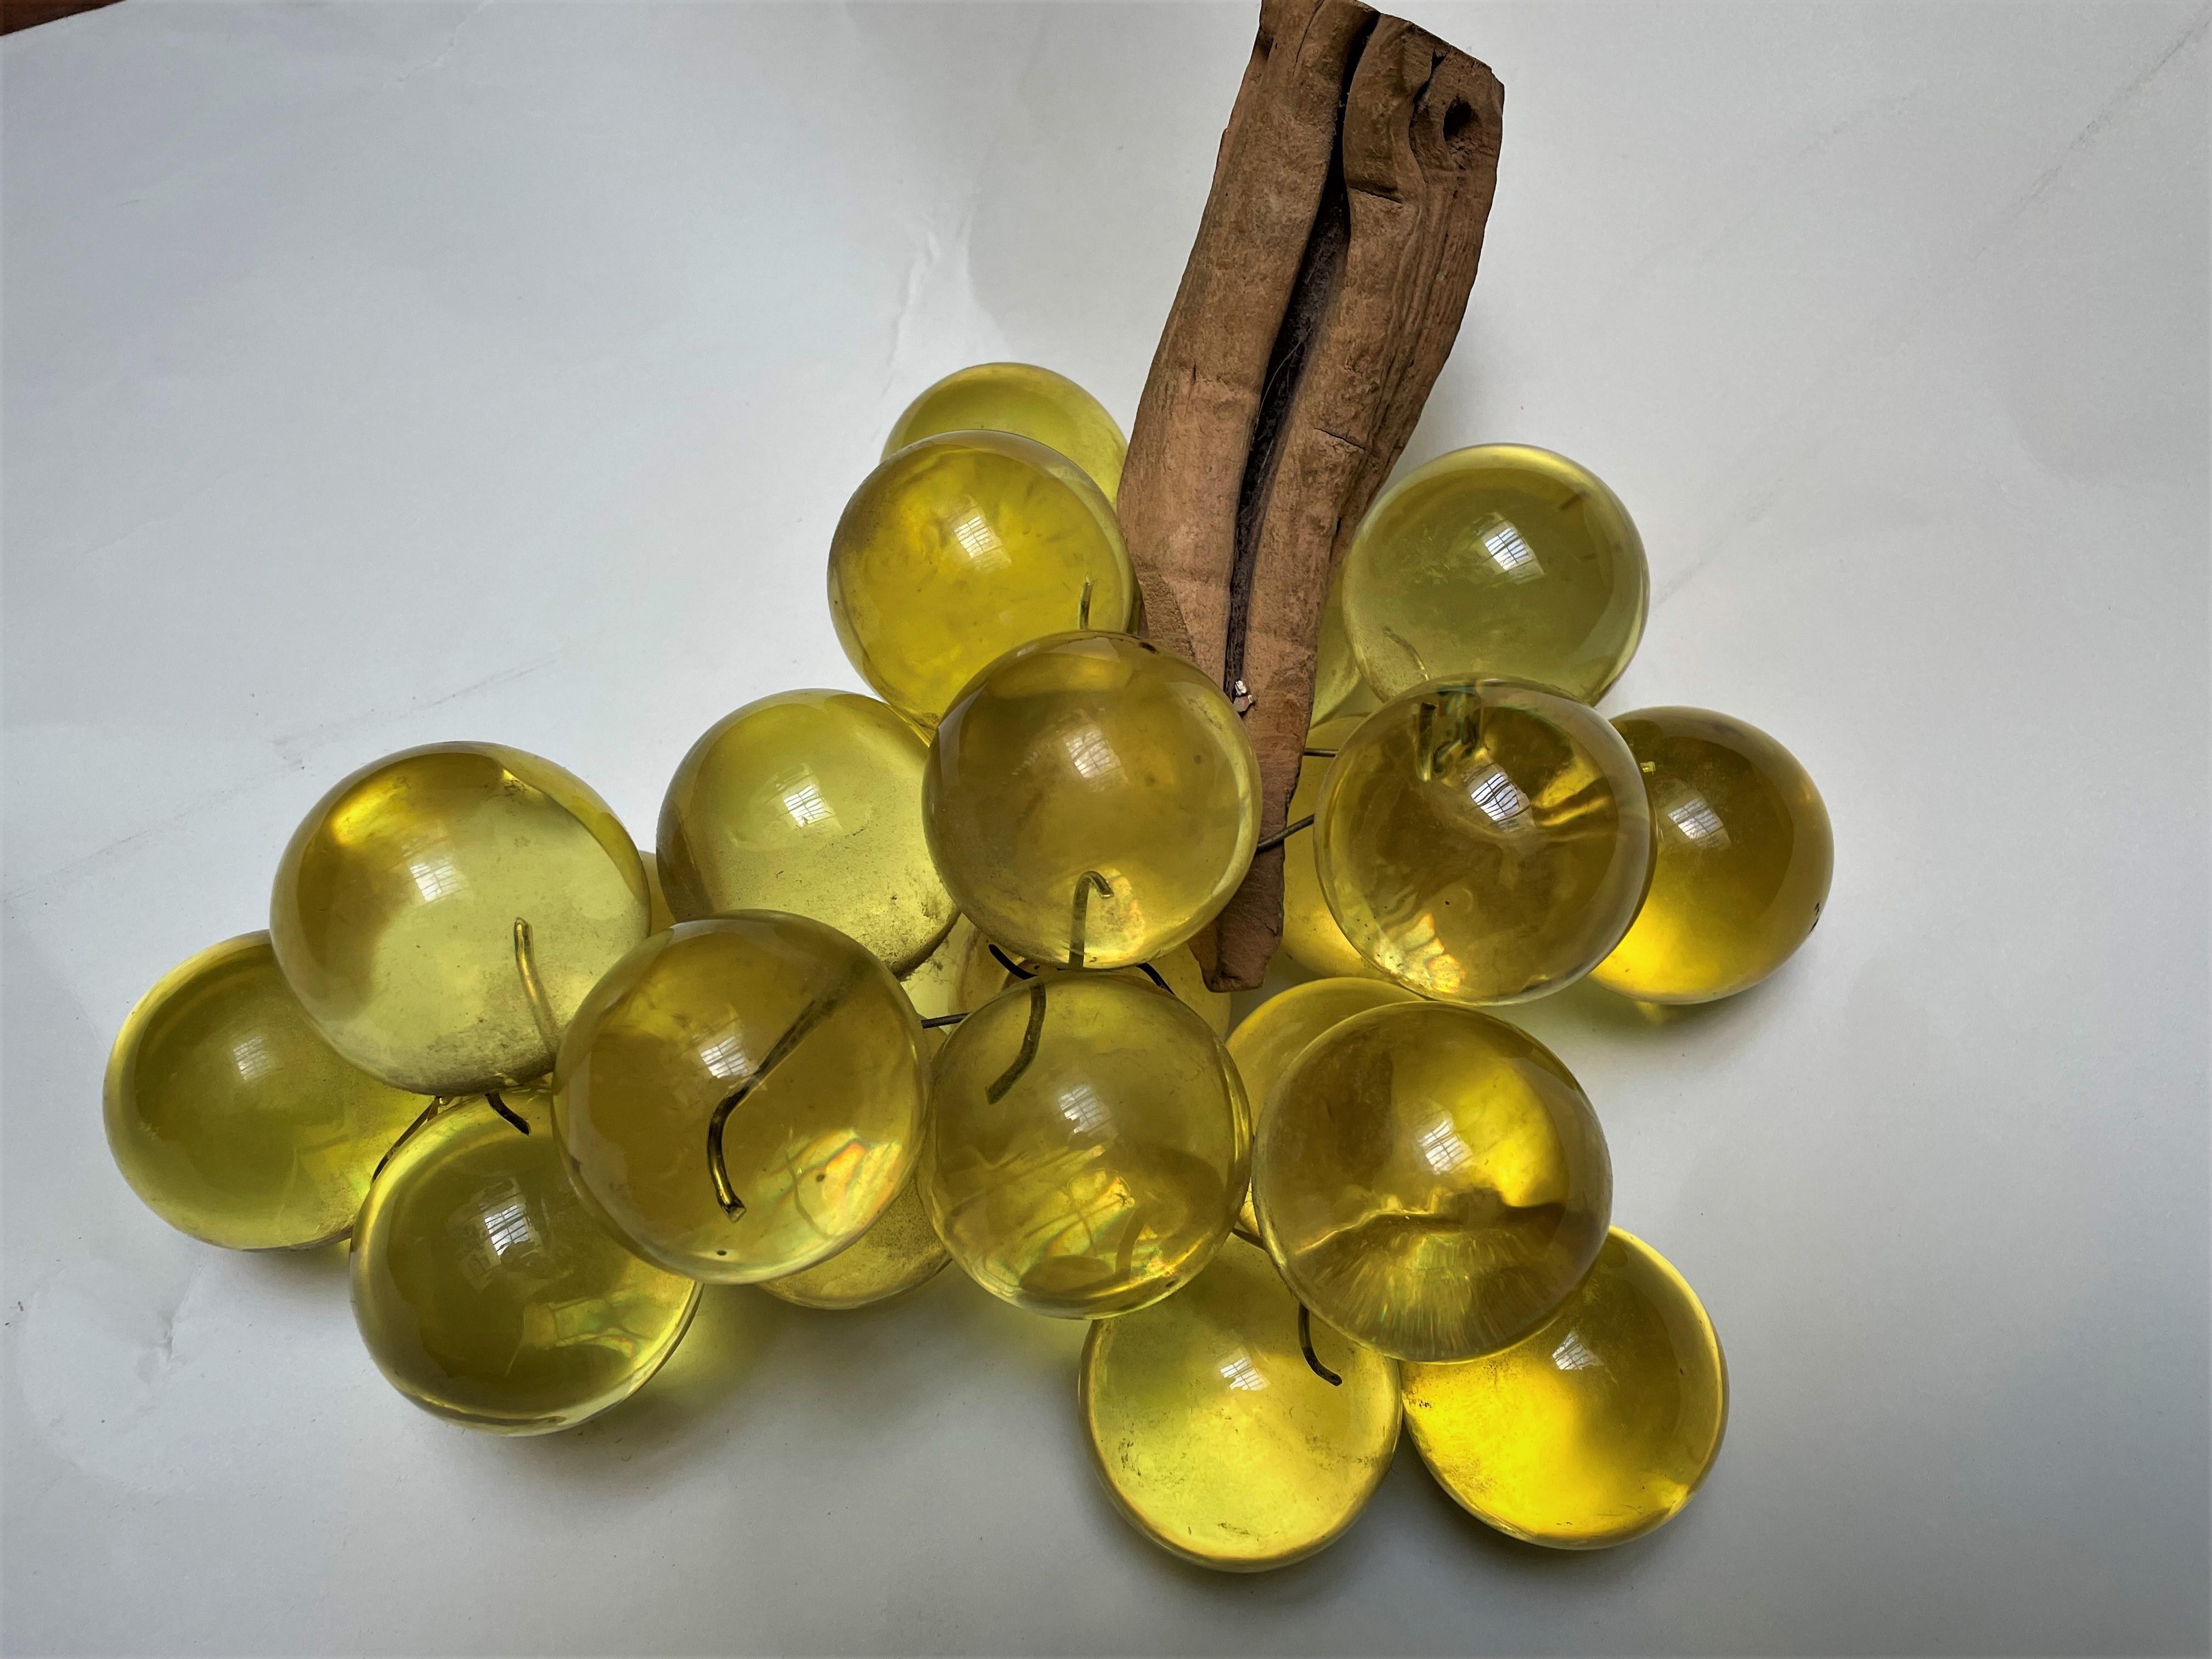 You want a splash of color? Here it is! These glassy yellow grapes are huge, about 2 inches in diameter each and they are full of pale yellow light reflecting color! The Lucite grapes are held to the rustic driftwood with wire and are flexible so